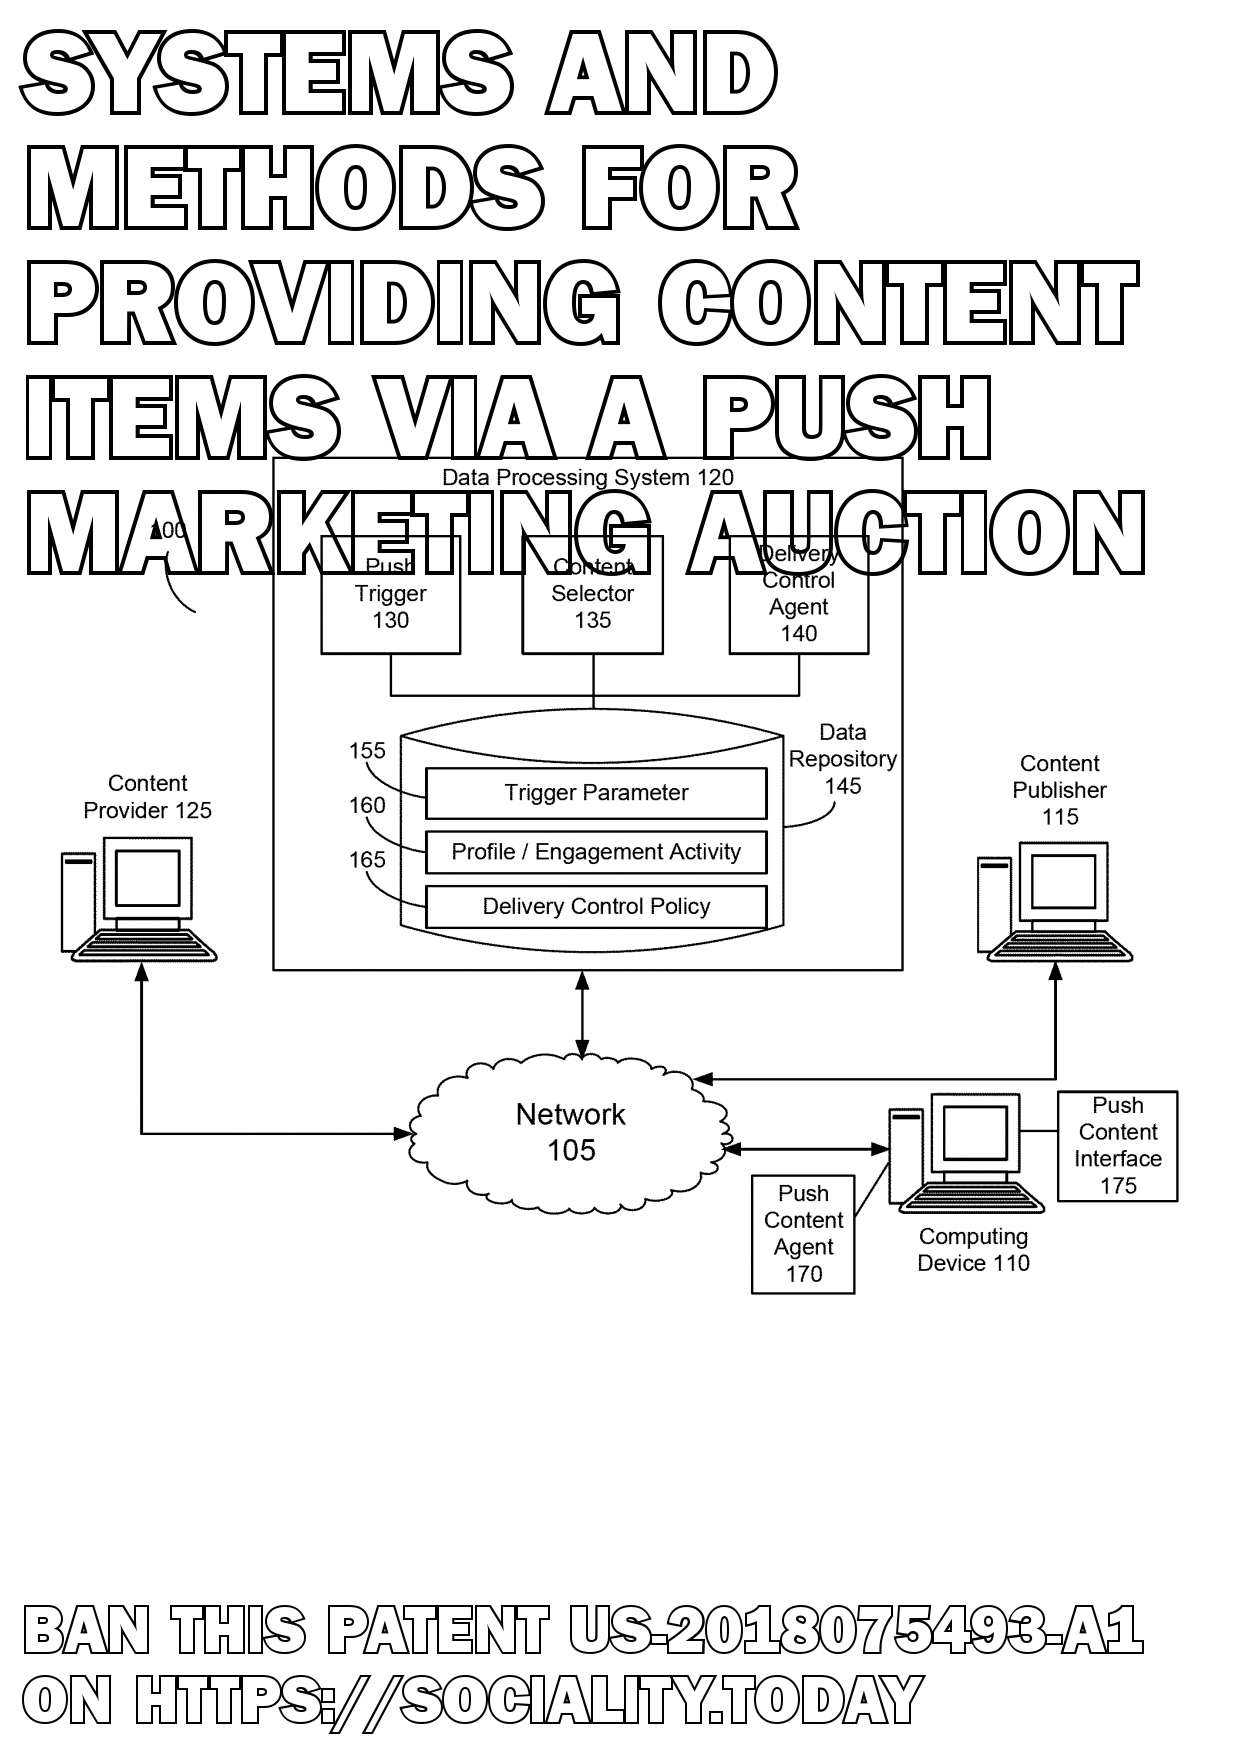 Systems and methods for providing content items via a push marketing auction  - US-2018075493-A1